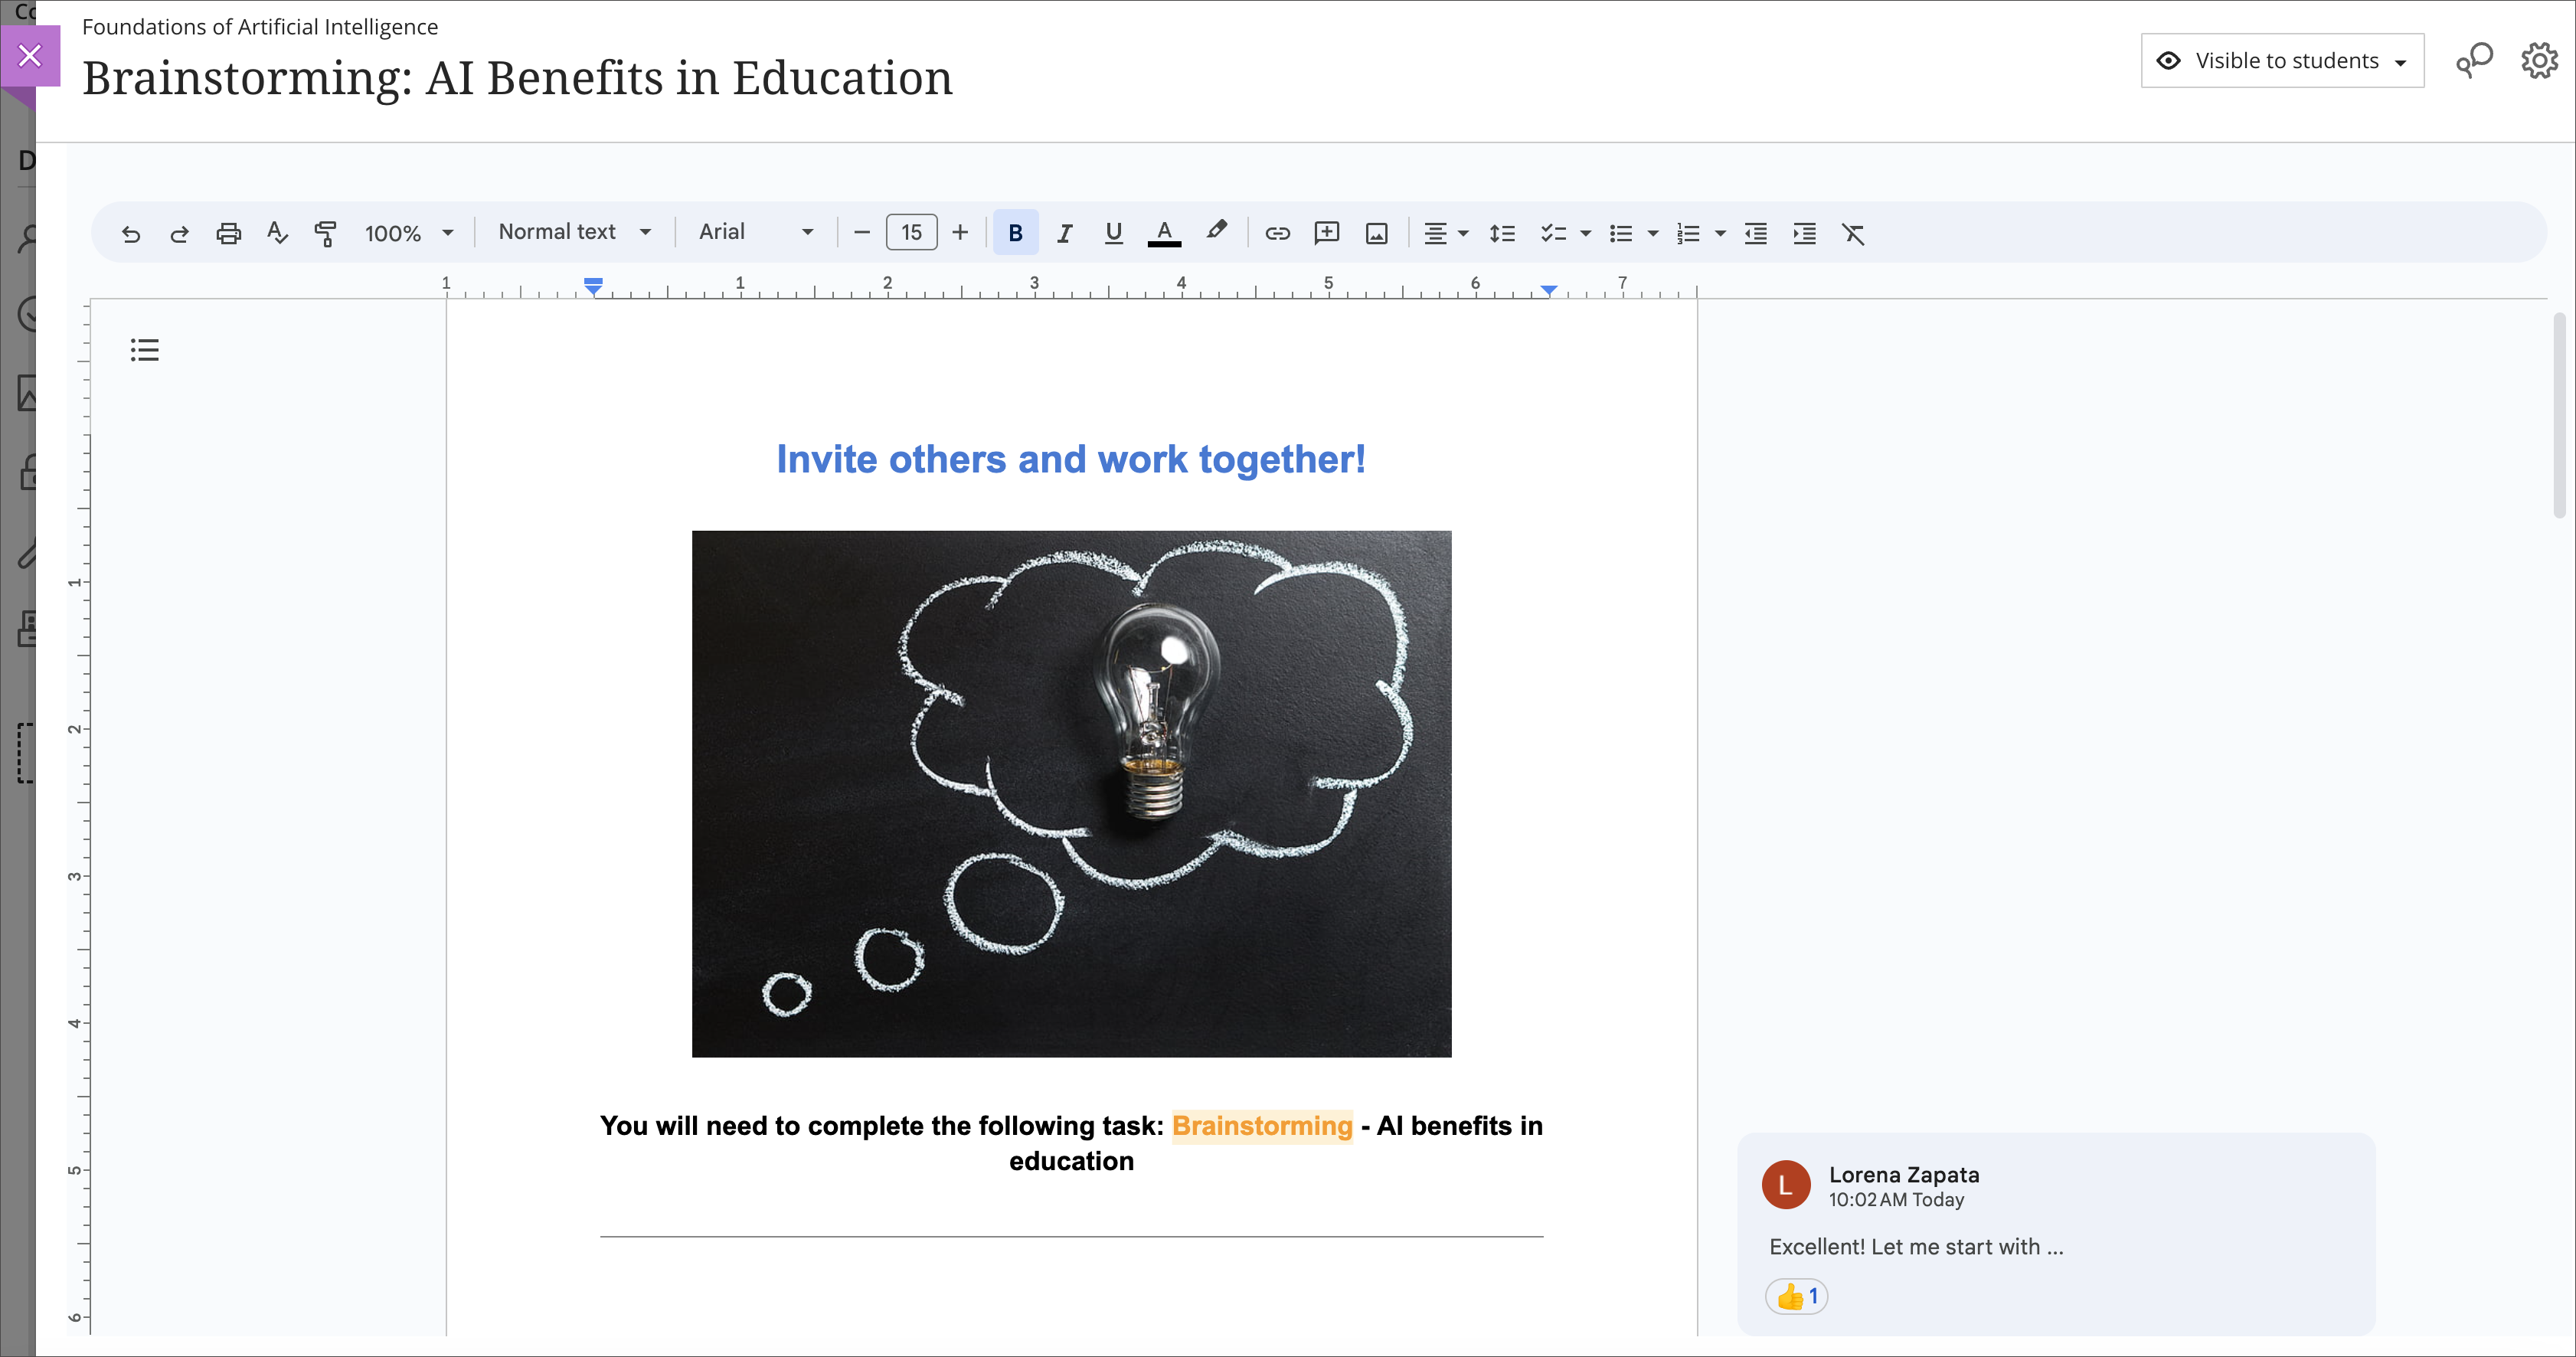 Image 1: Example of an embedded Google collaborative document for students